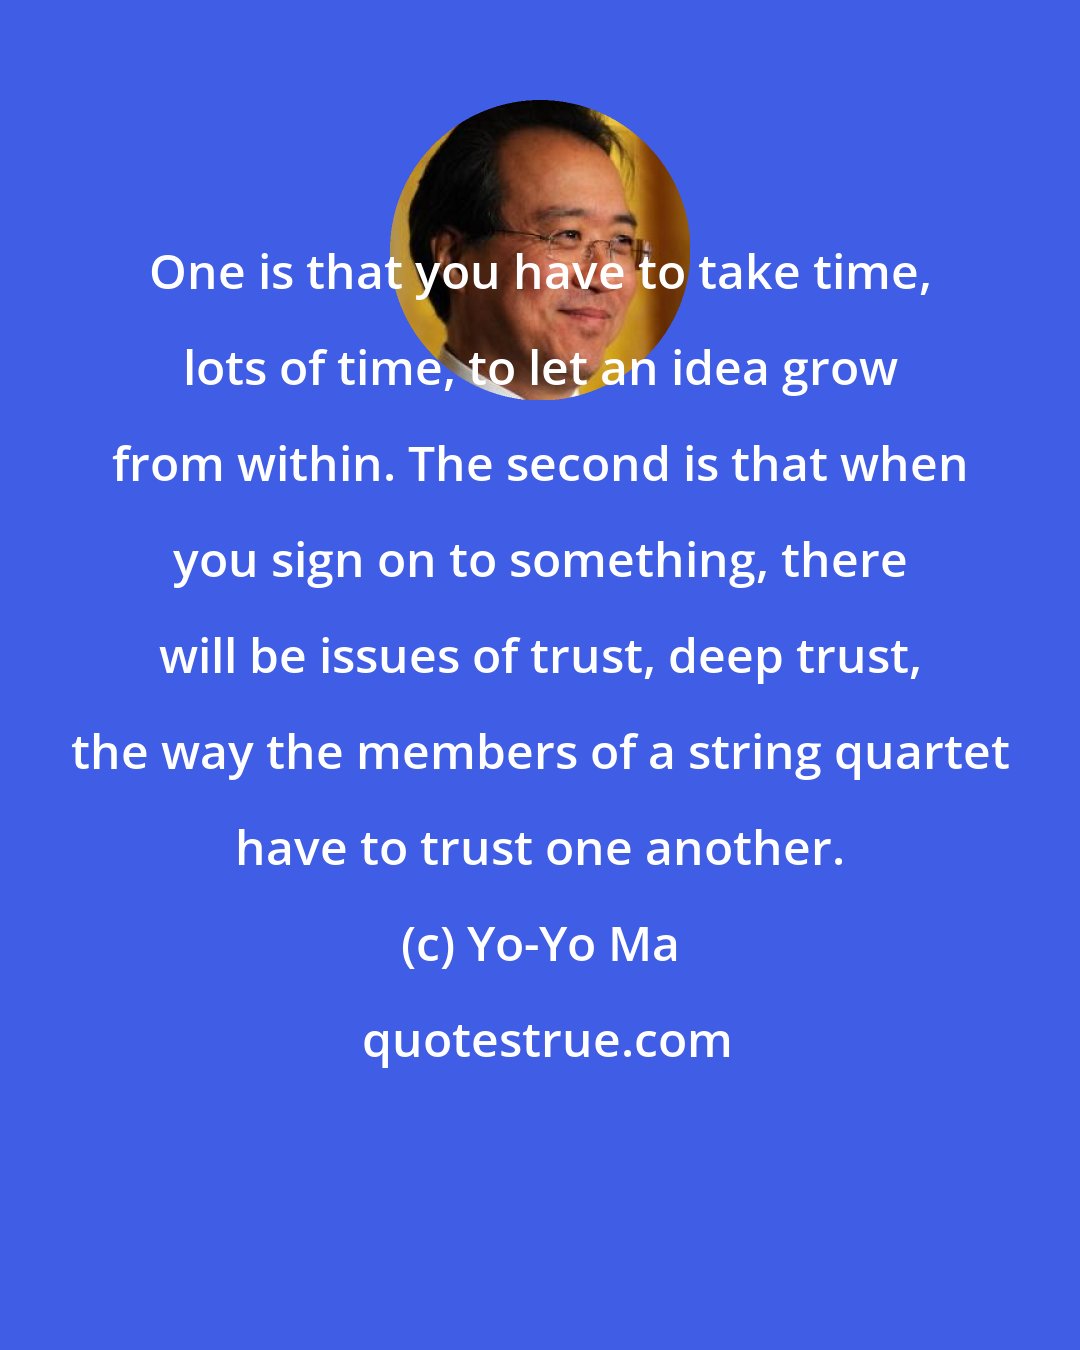 Yo-Yo Ma: One is that you have to take time, lots of time, to let an idea grow from within. The second is that when you sign on to something, there will be issues of trust, deep trust, the way the members of a string quartet have to trust one another.